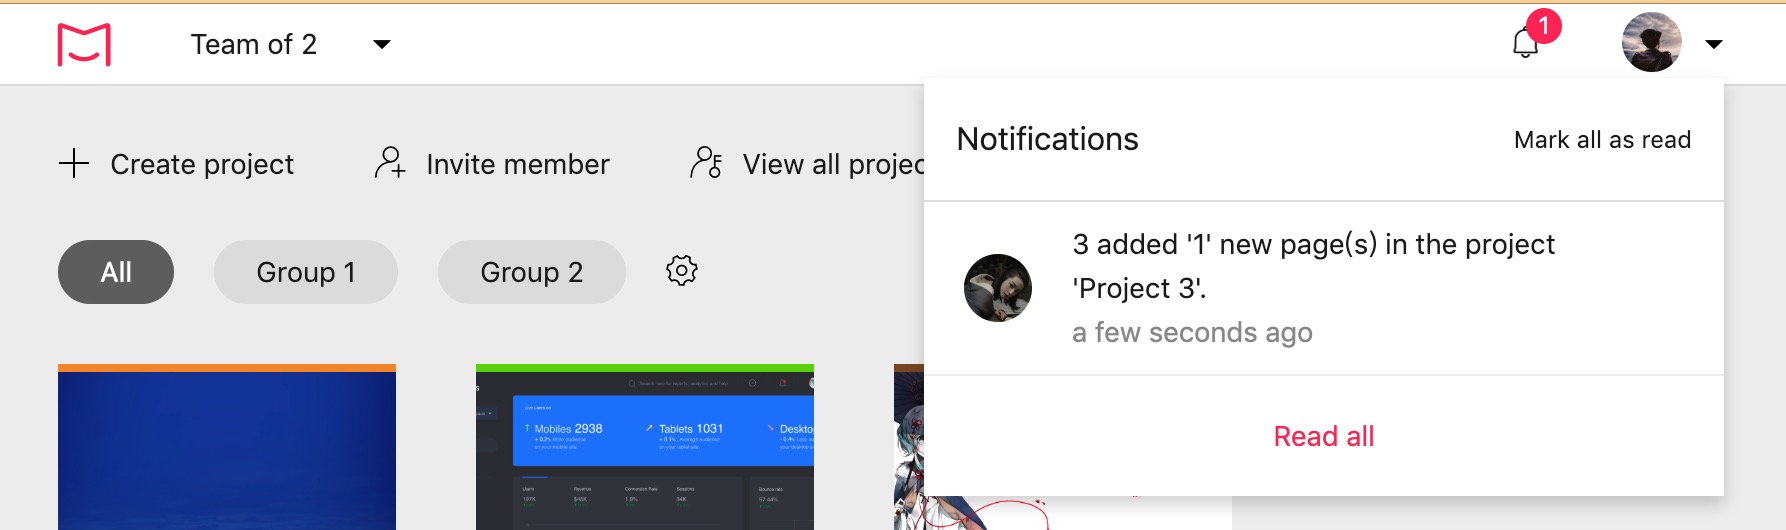 Real-time notifications on project changes